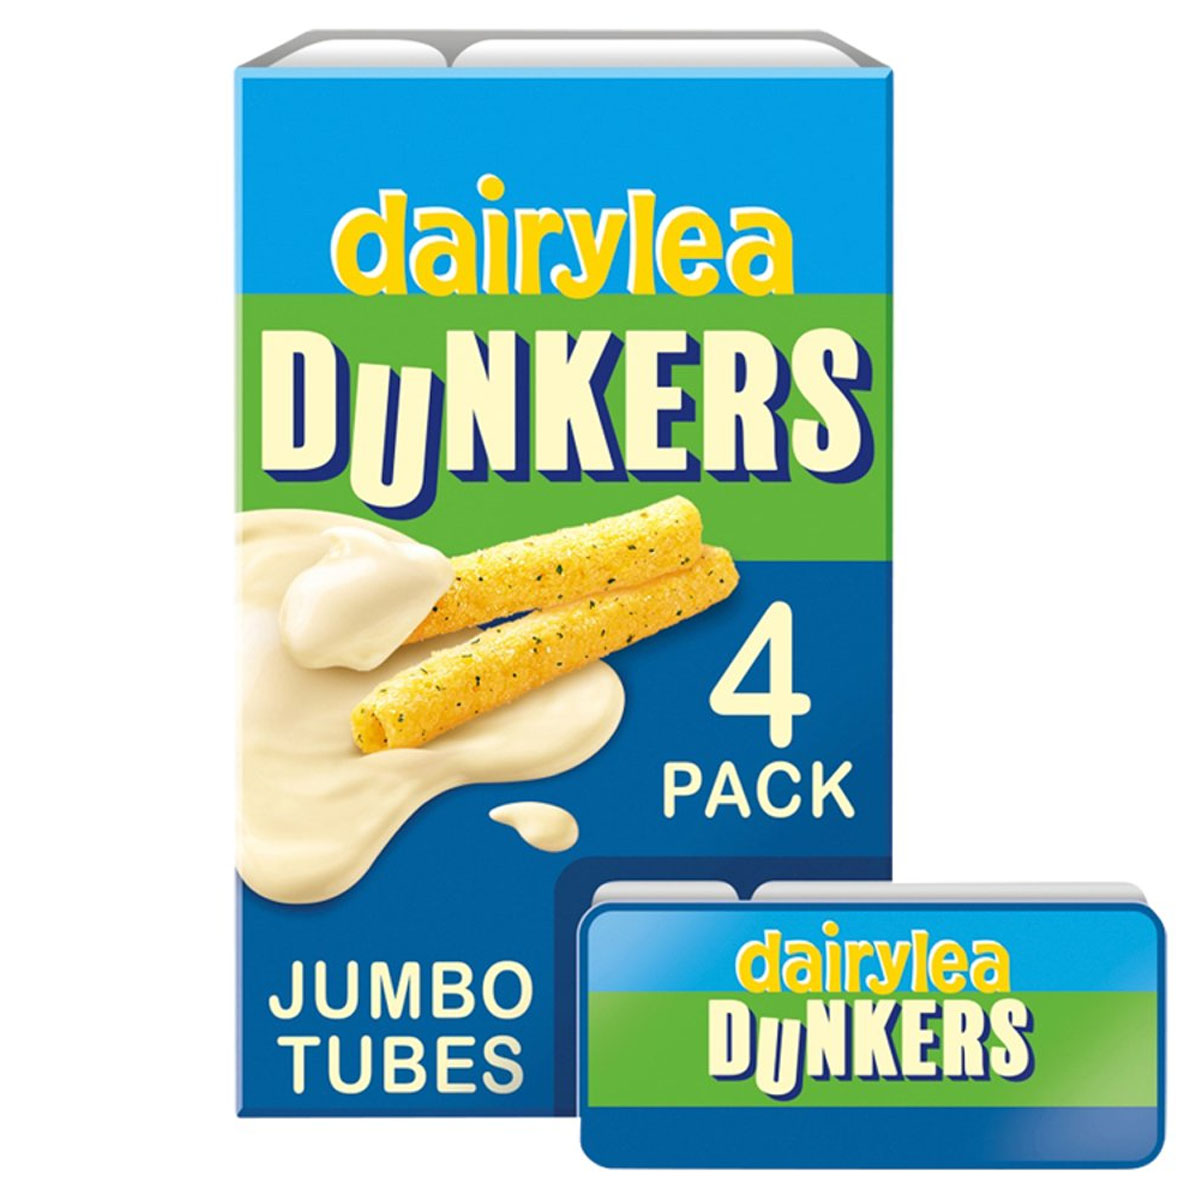 Dairylea Dunkers - Jumbo Tubes Cheese Snacks - 4 Pack 164g - Continental Food Store